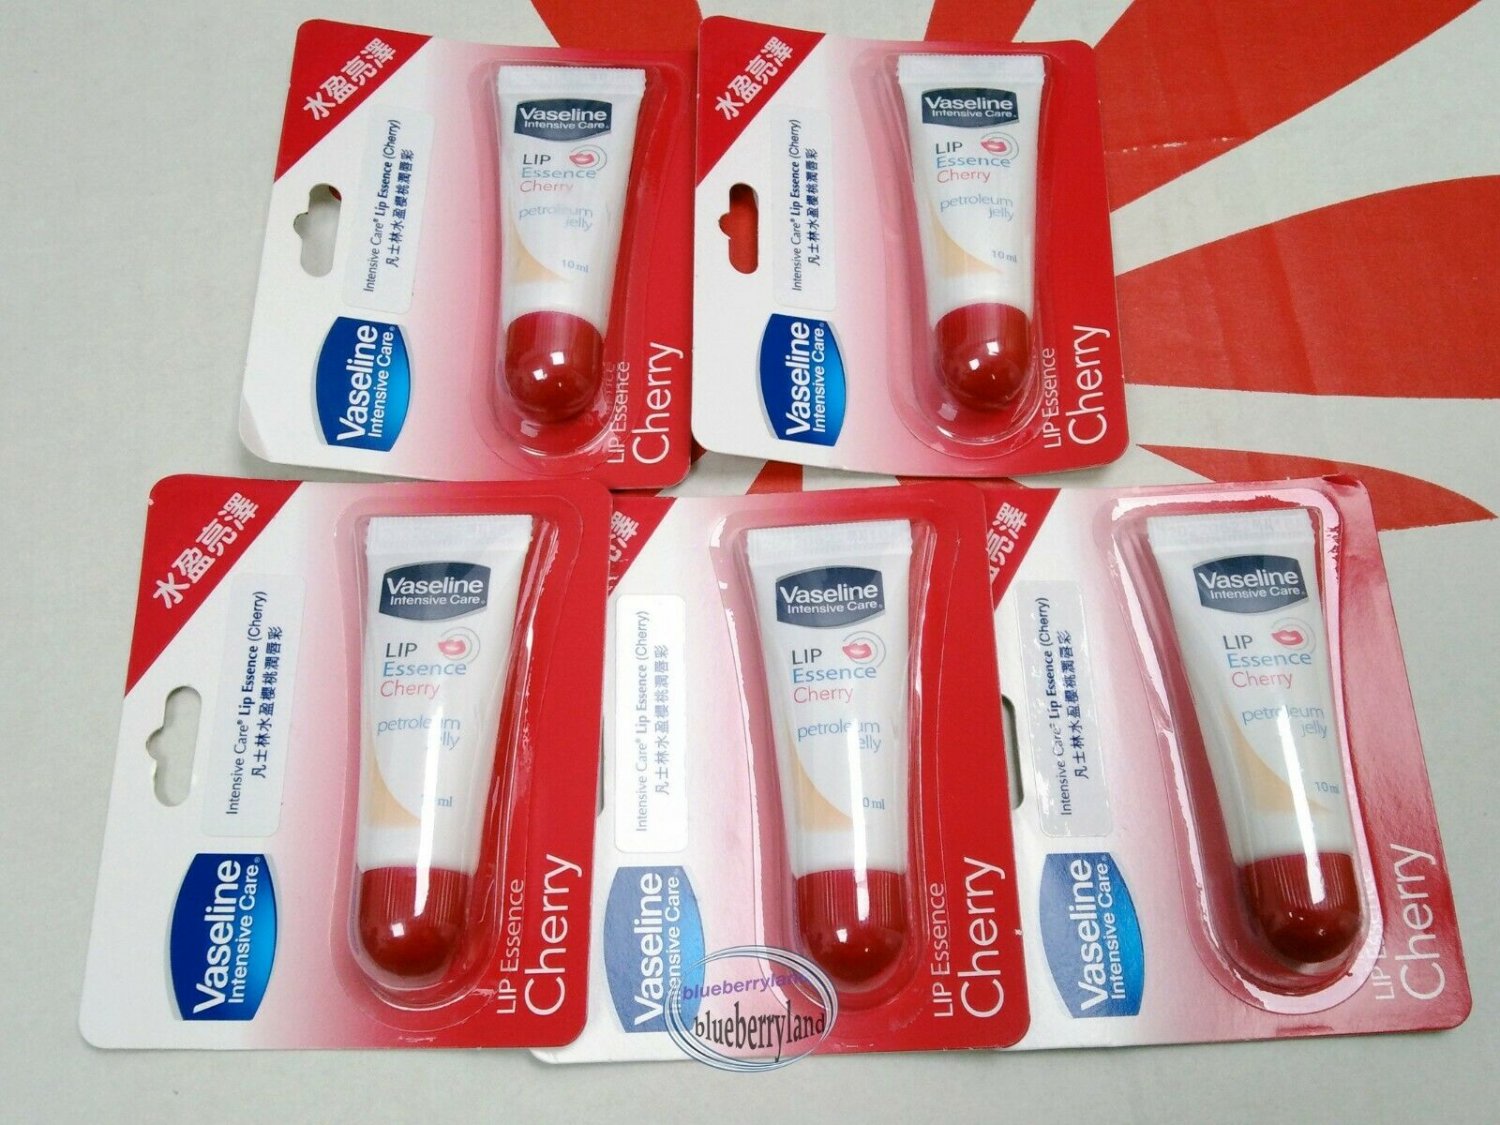 Lots of 5 Vaseline Anti Dry & Chapped Moisturizing Intensive Care Lip Therapy - Cherry flavor 10ml